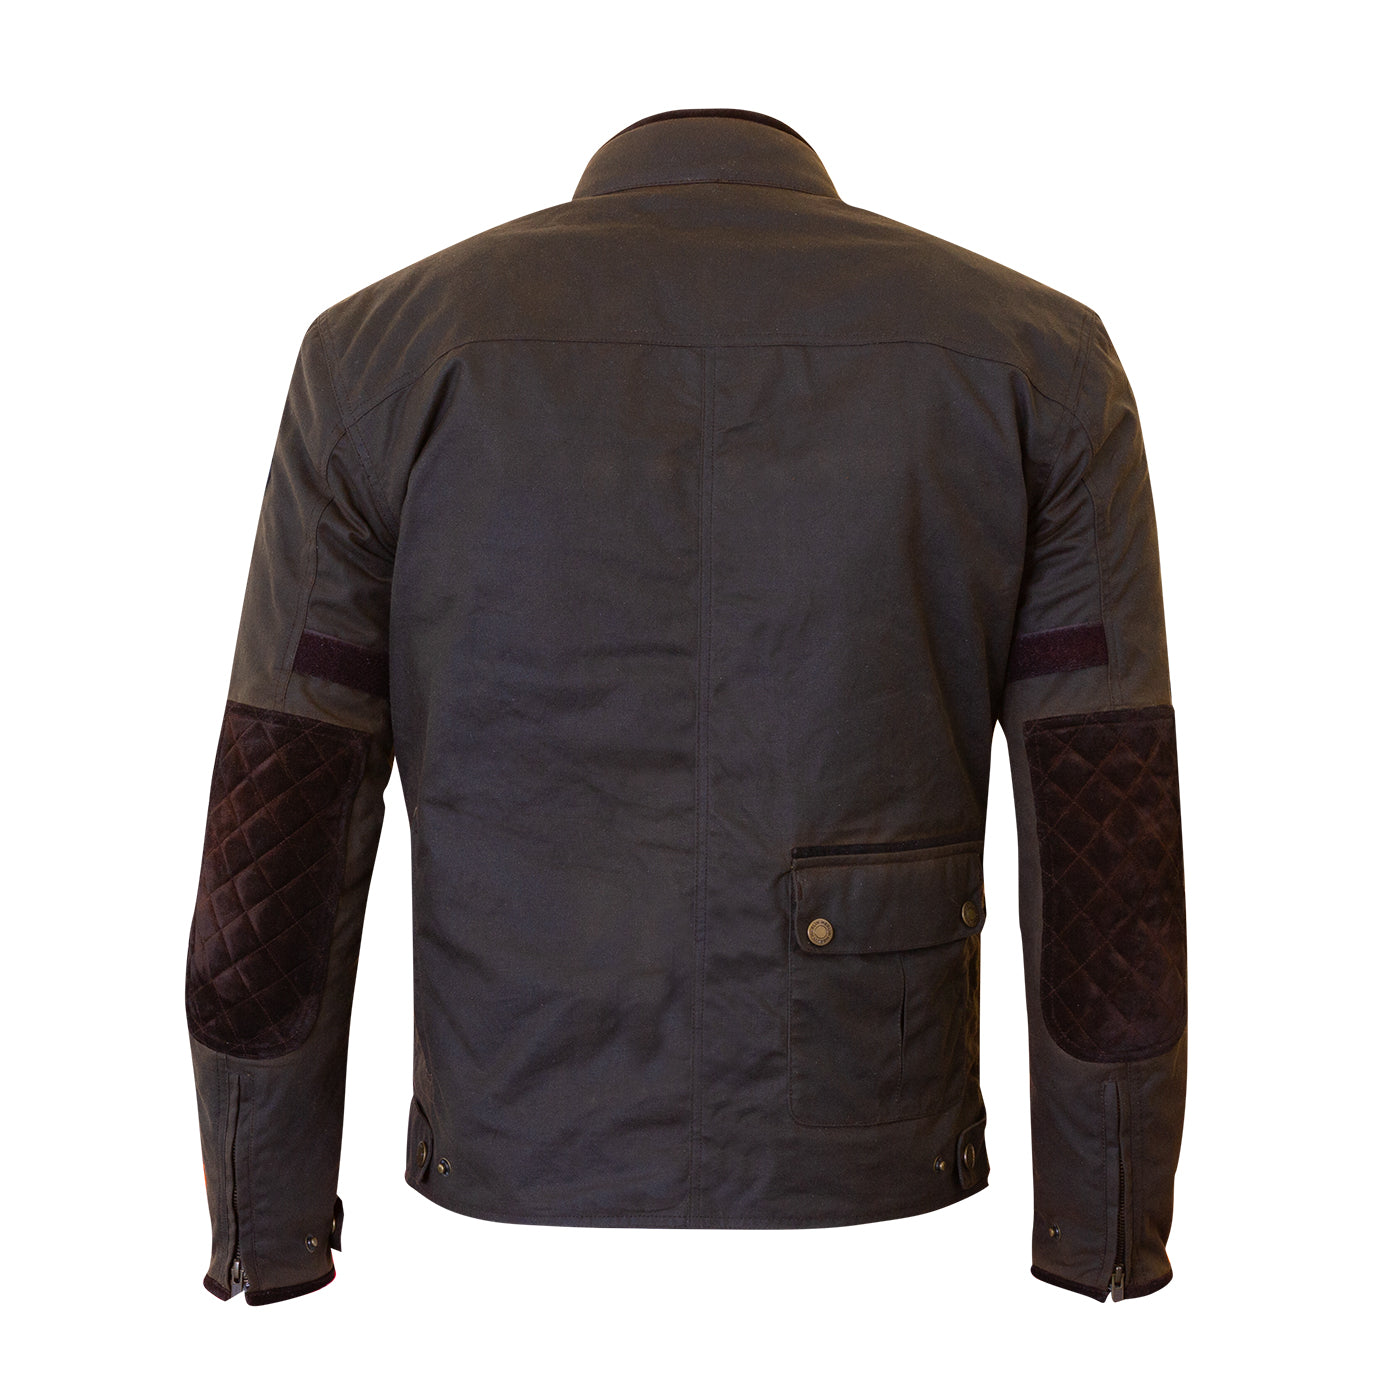 Expedition Waxed Cotton Jacket